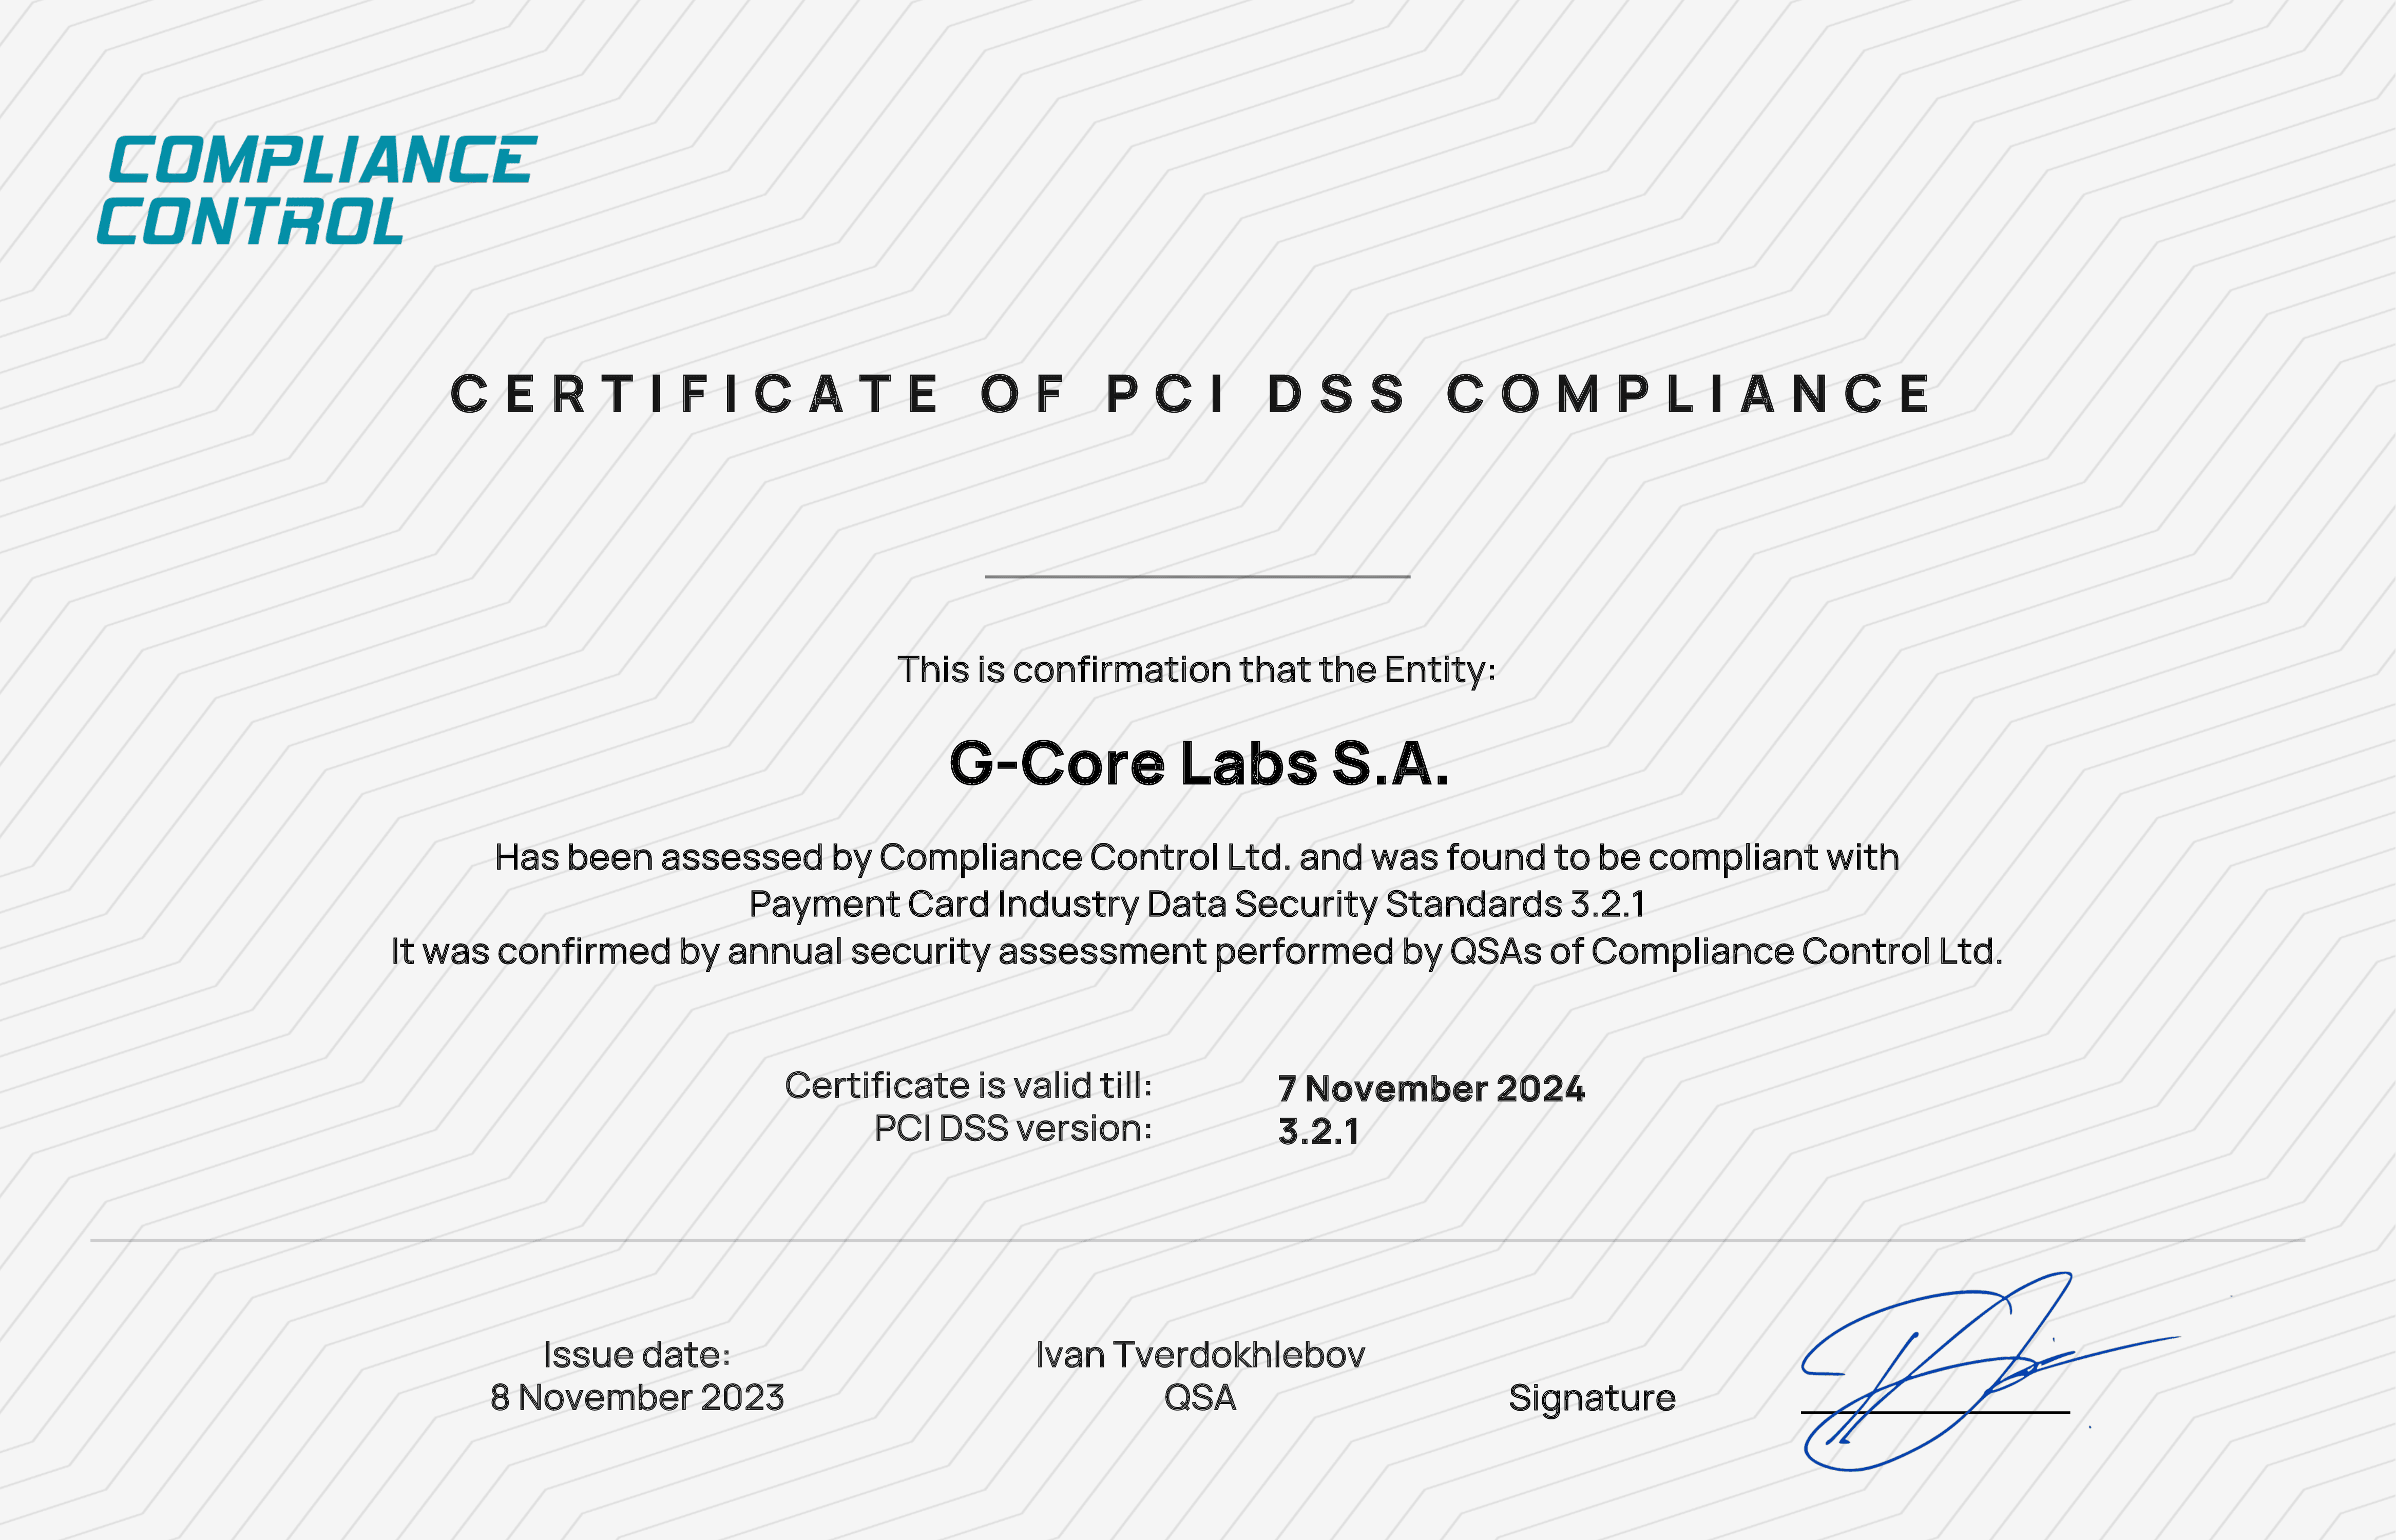 Certificate of PCI DSS Compliance